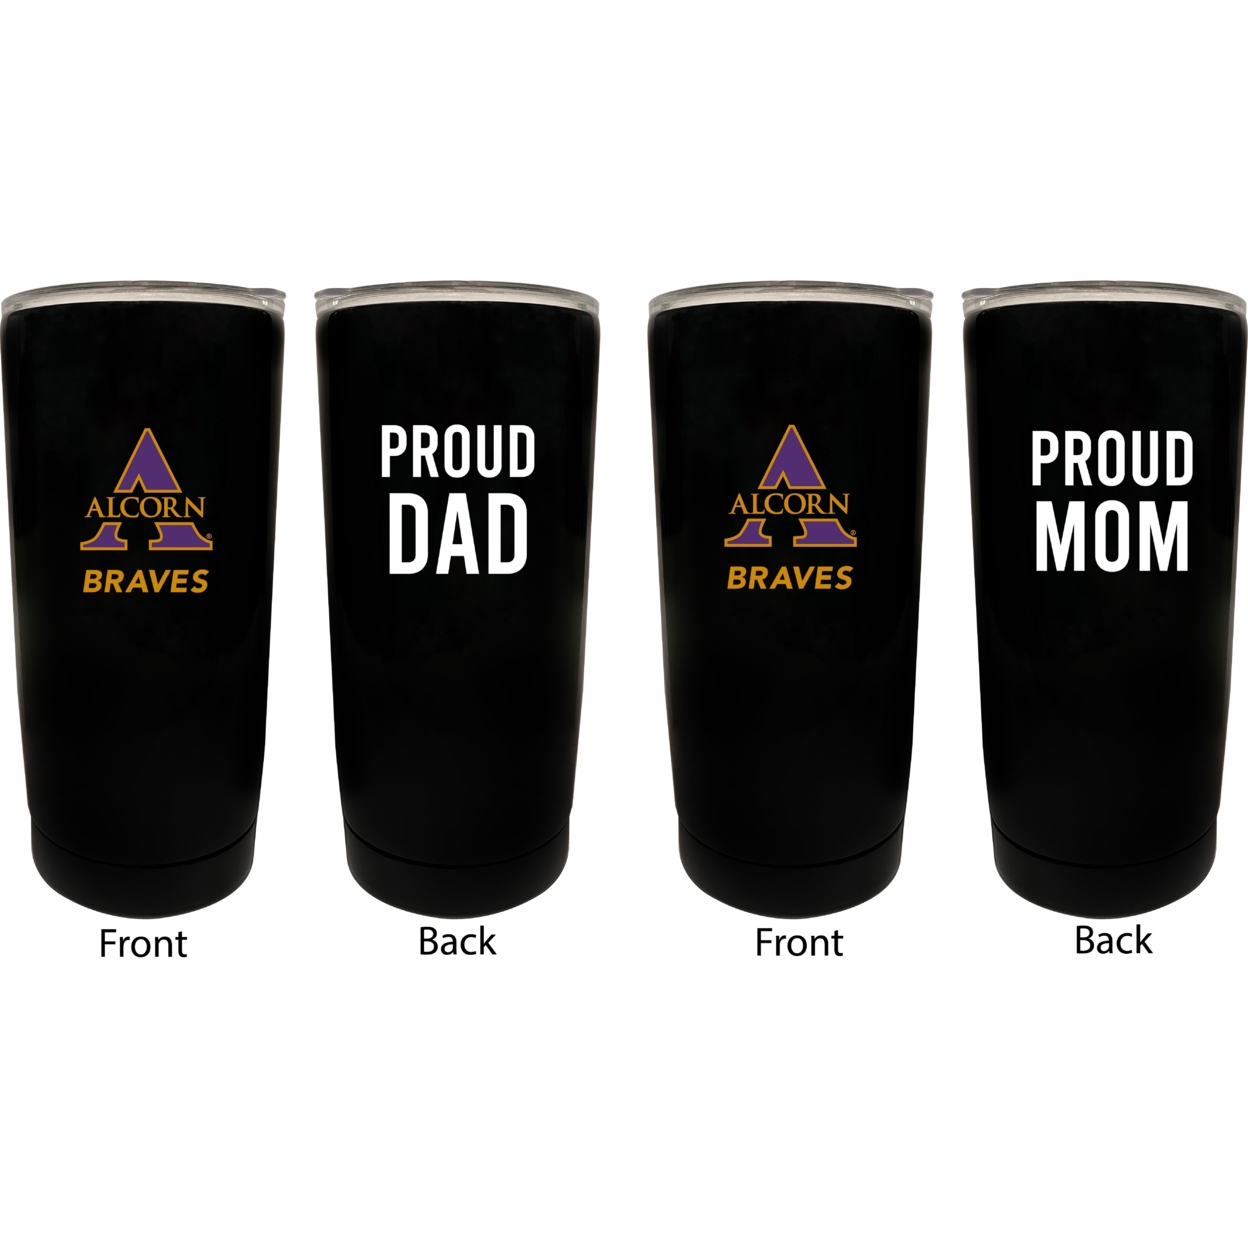 Alcorn State Braves Proud Mom And Dad 16 Oz Insulated Stainless Steel Tumblers 2 Pack Black.